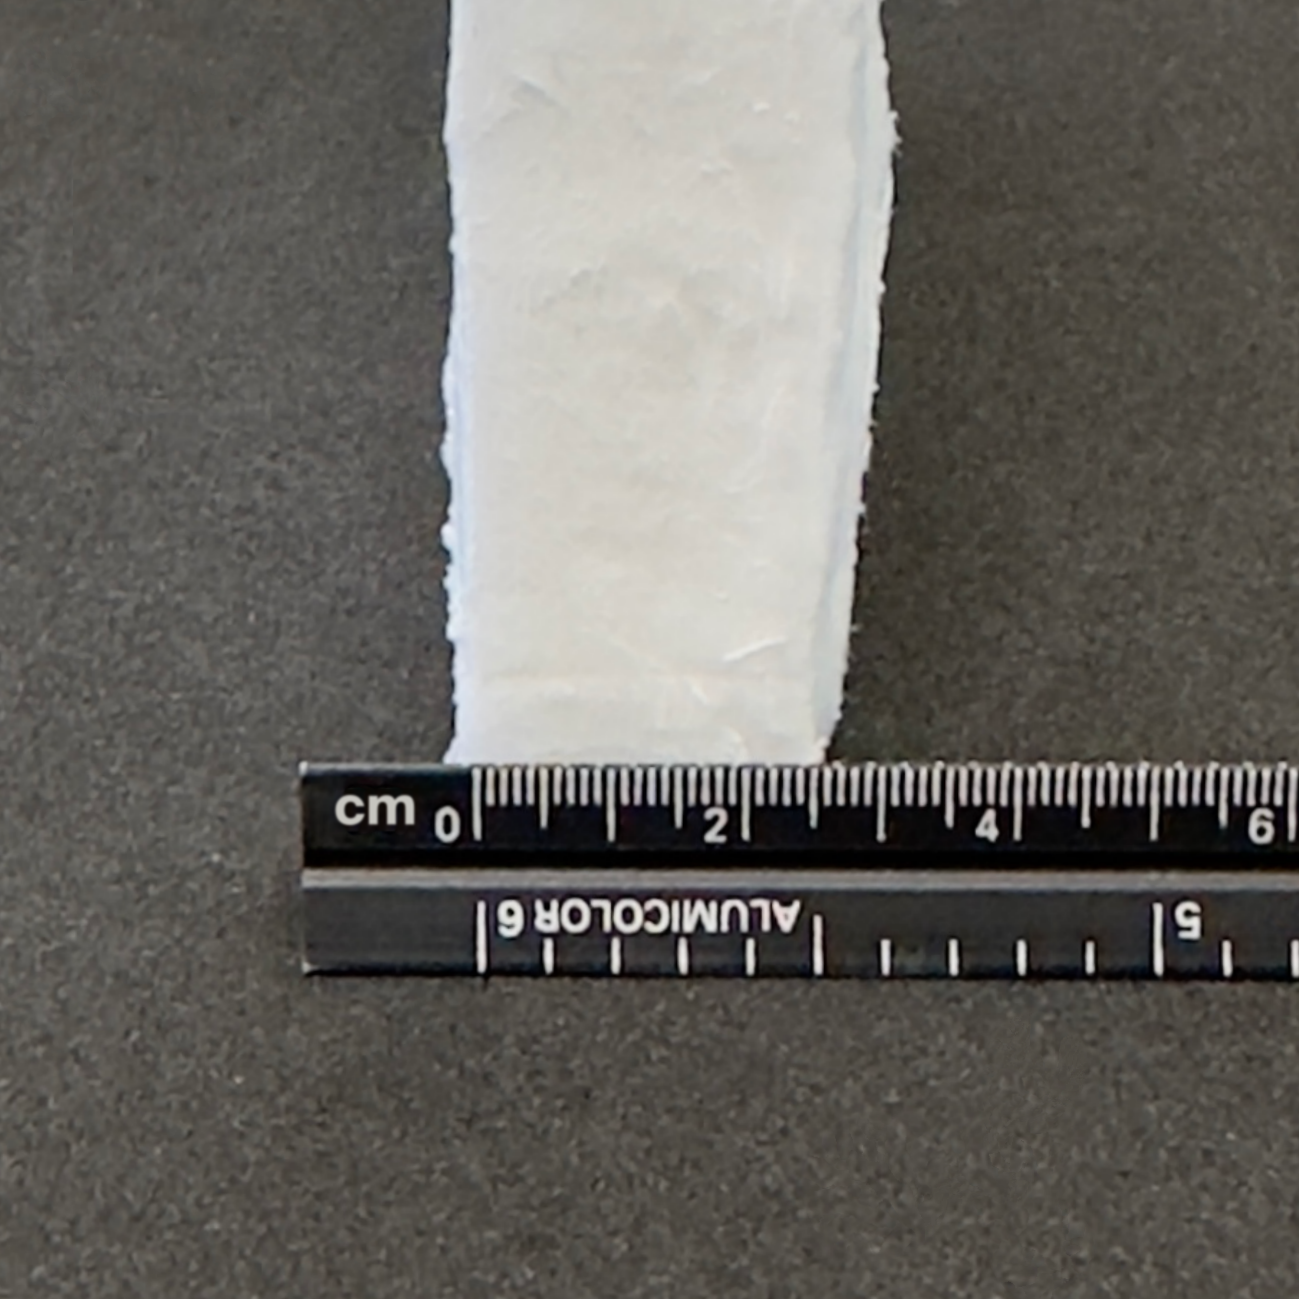 This is a 1 gram sample showing the depth of our product. Scale: cm